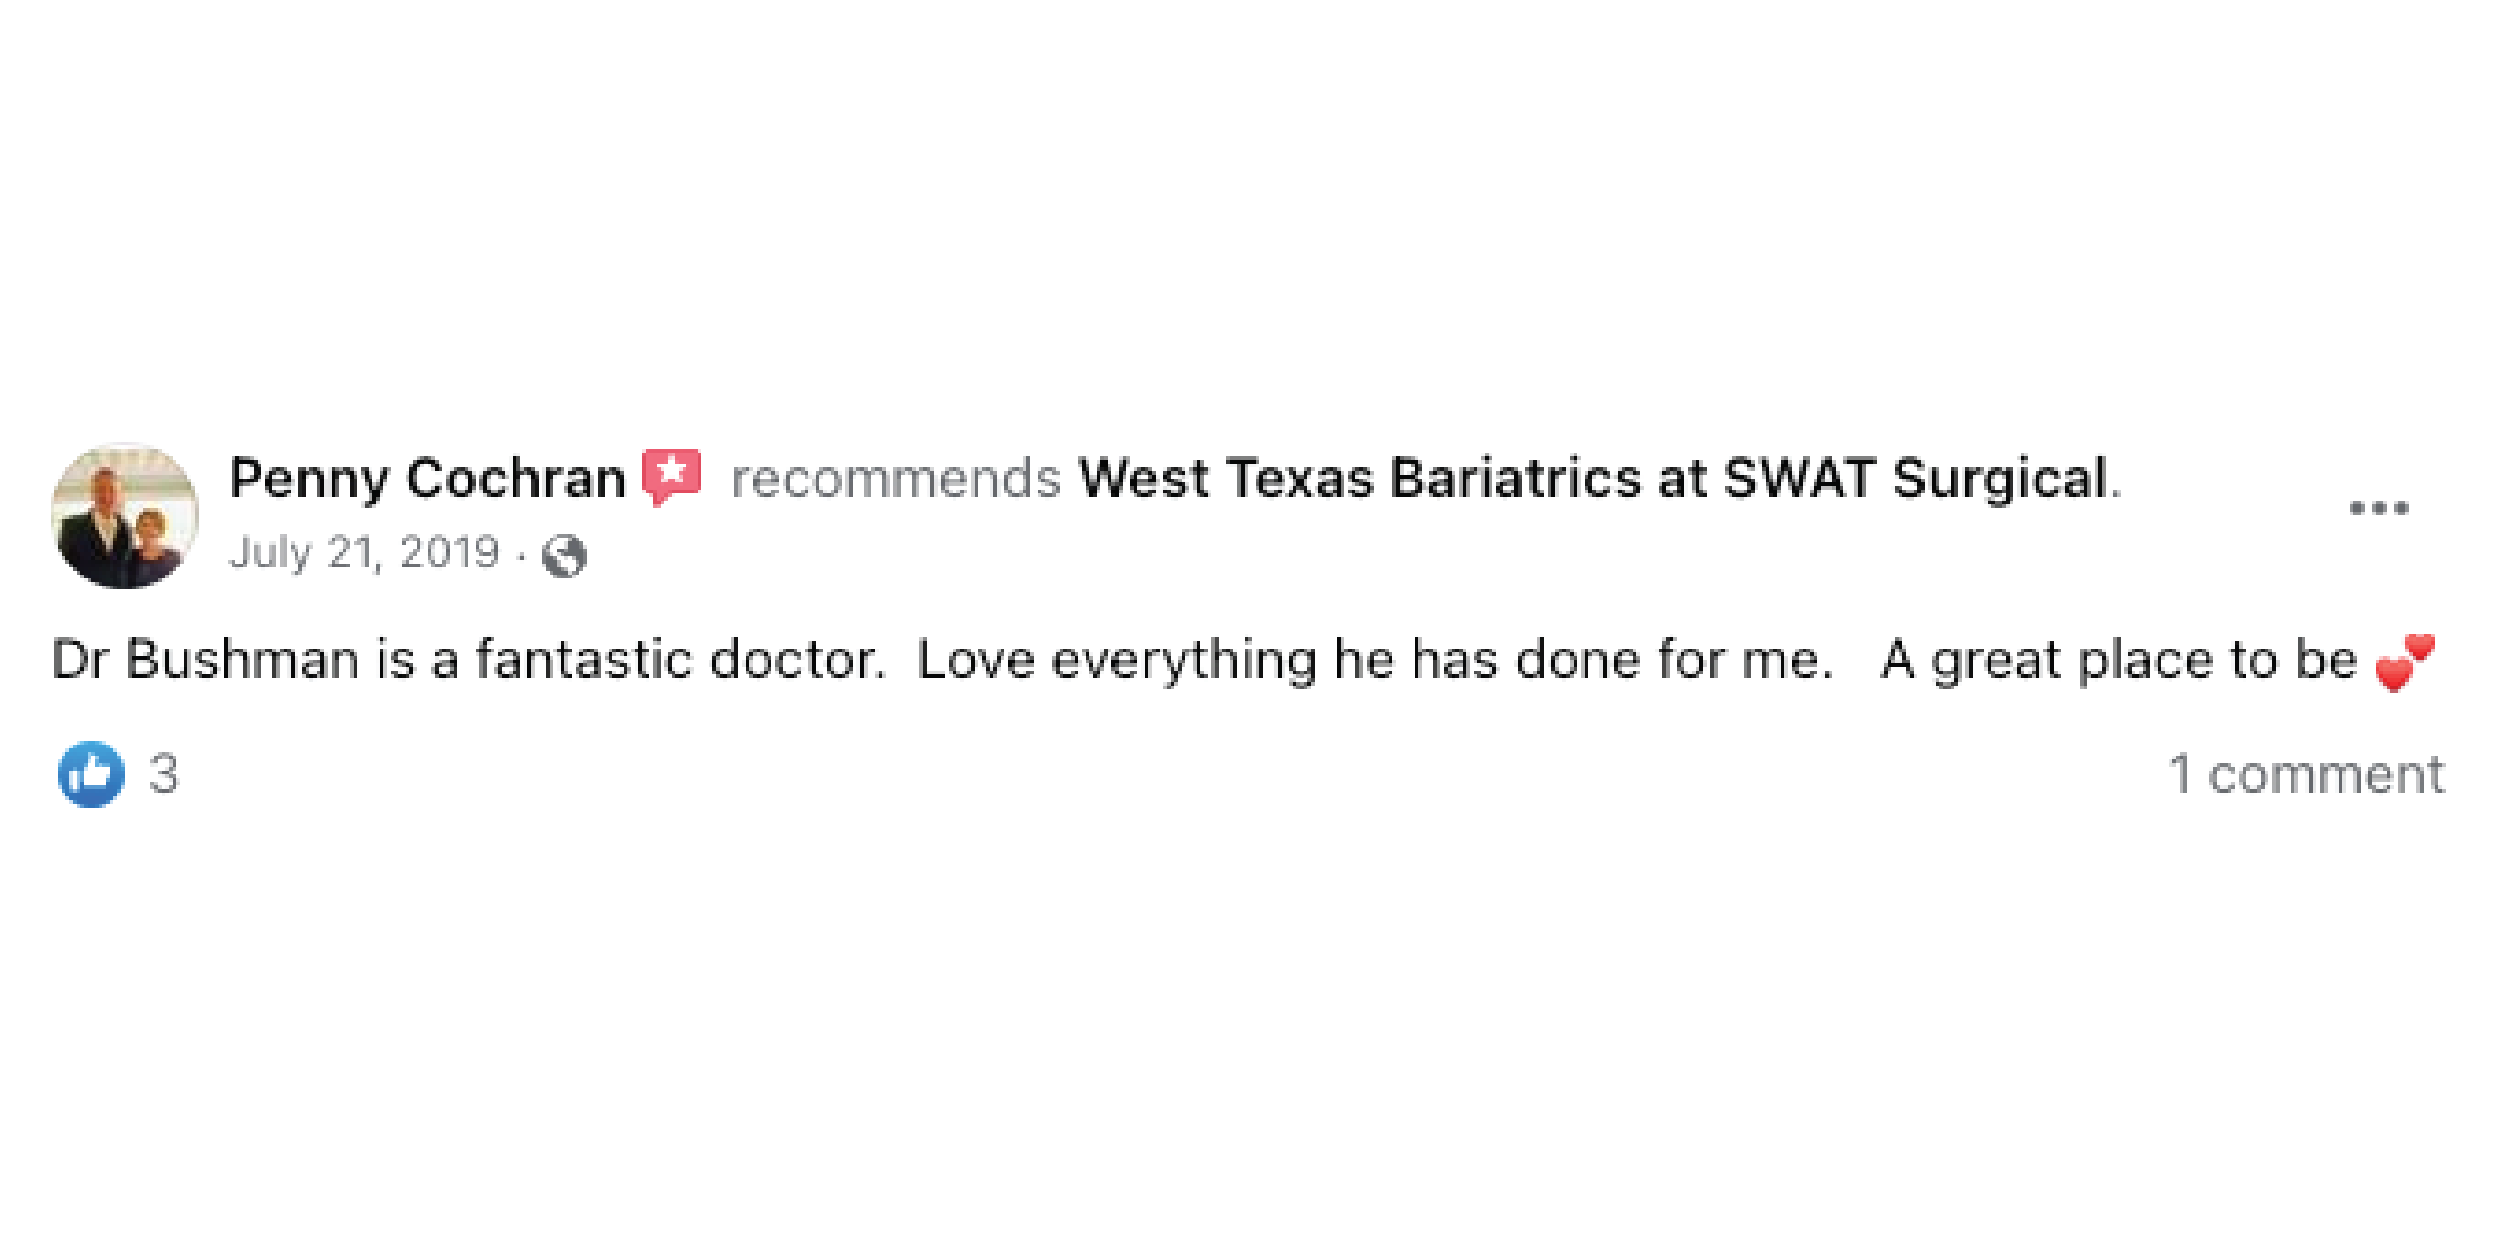 Patients' review of their bariatric surgery at West Texas Bariatrics